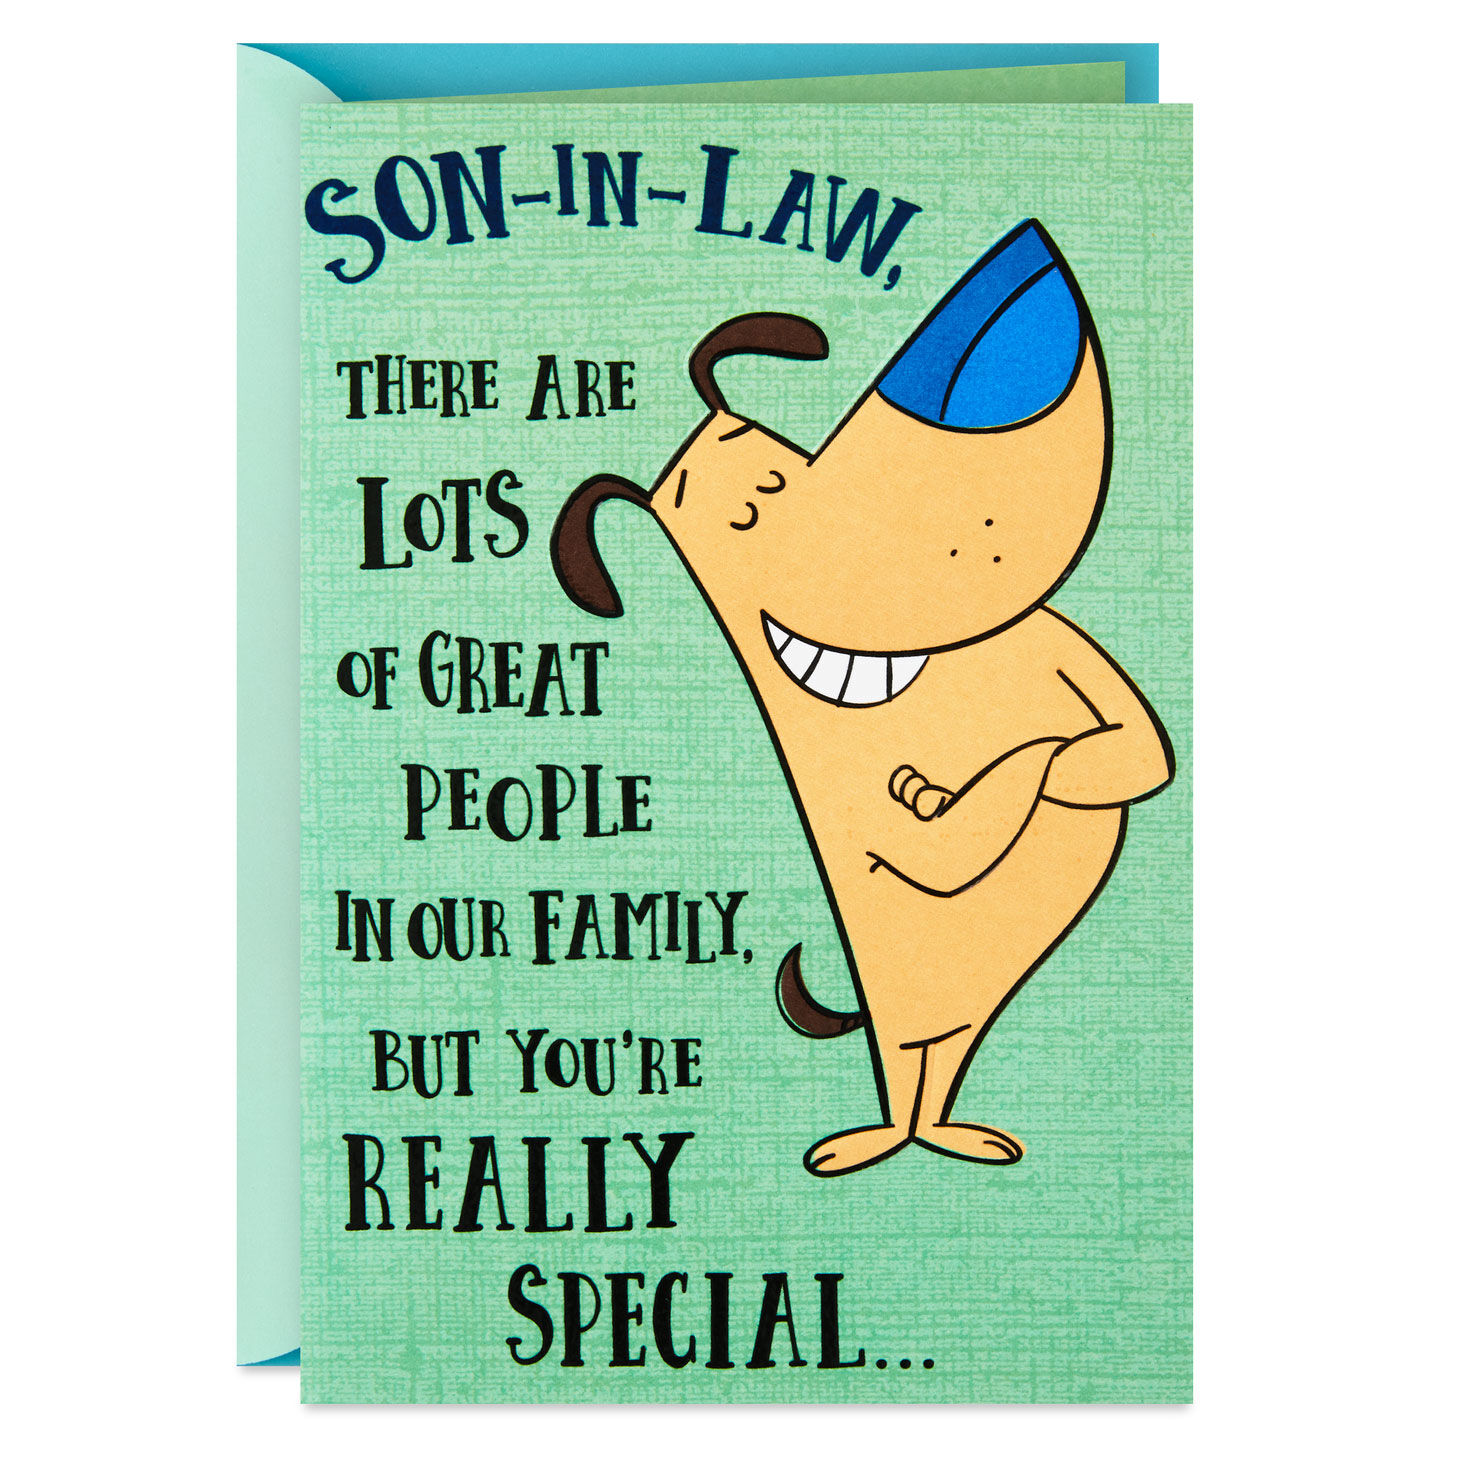 You're Really Special Funny Birthday Card for Son-in-Law for only USD 2.99 | Hallmark